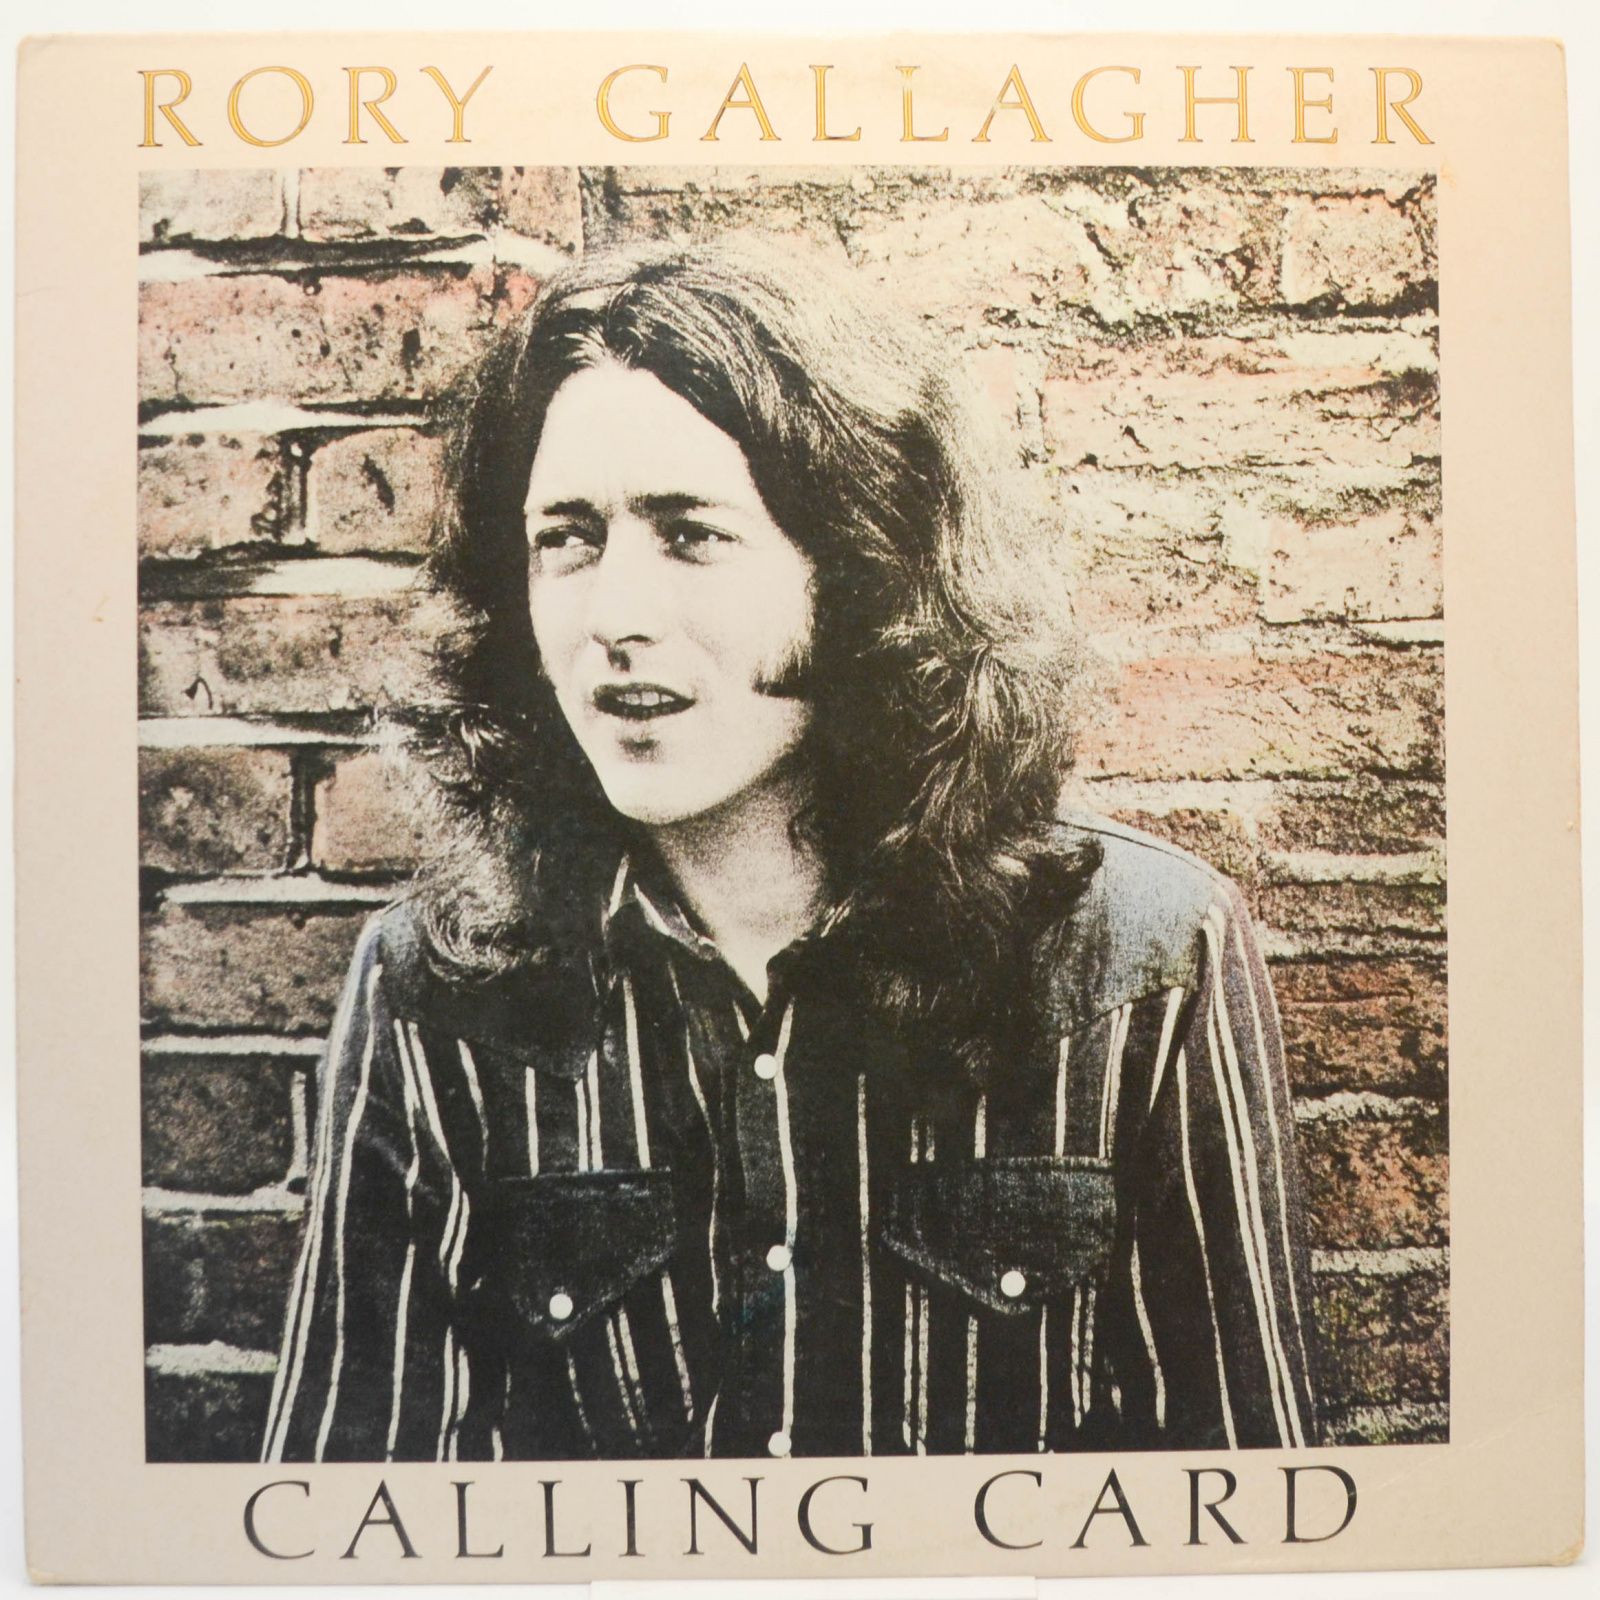 Rory Gallagher — Calling Card, 1976